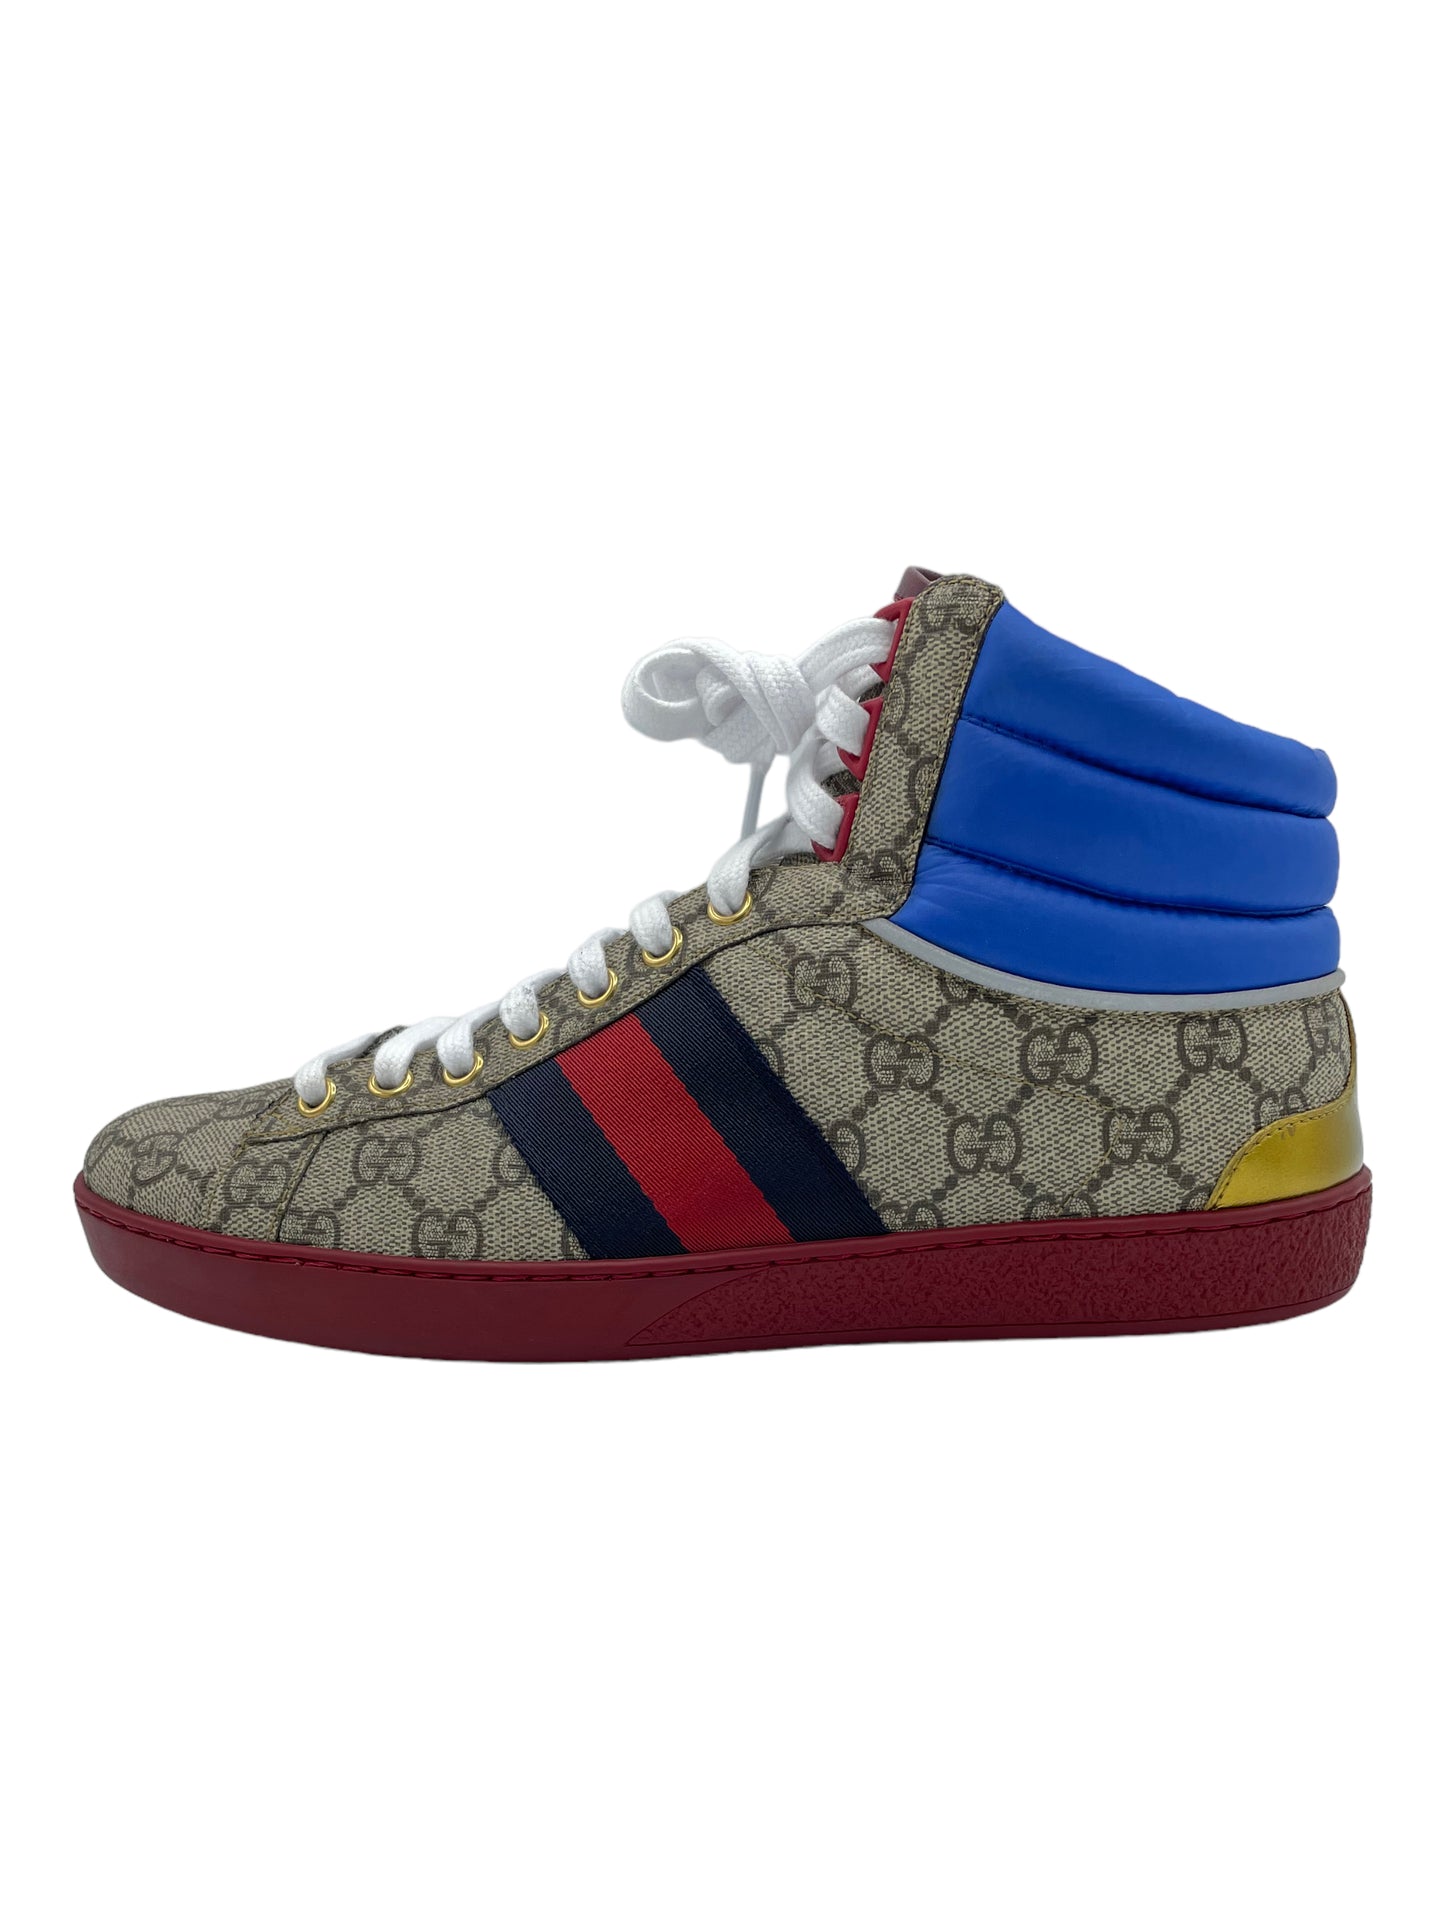 Gucci Tan High Top Sneakers - Genuine Design Luxury Consignment for Men. New & Pre-Owned Clothing, Shoes, & Accessories. Calgary, Canada